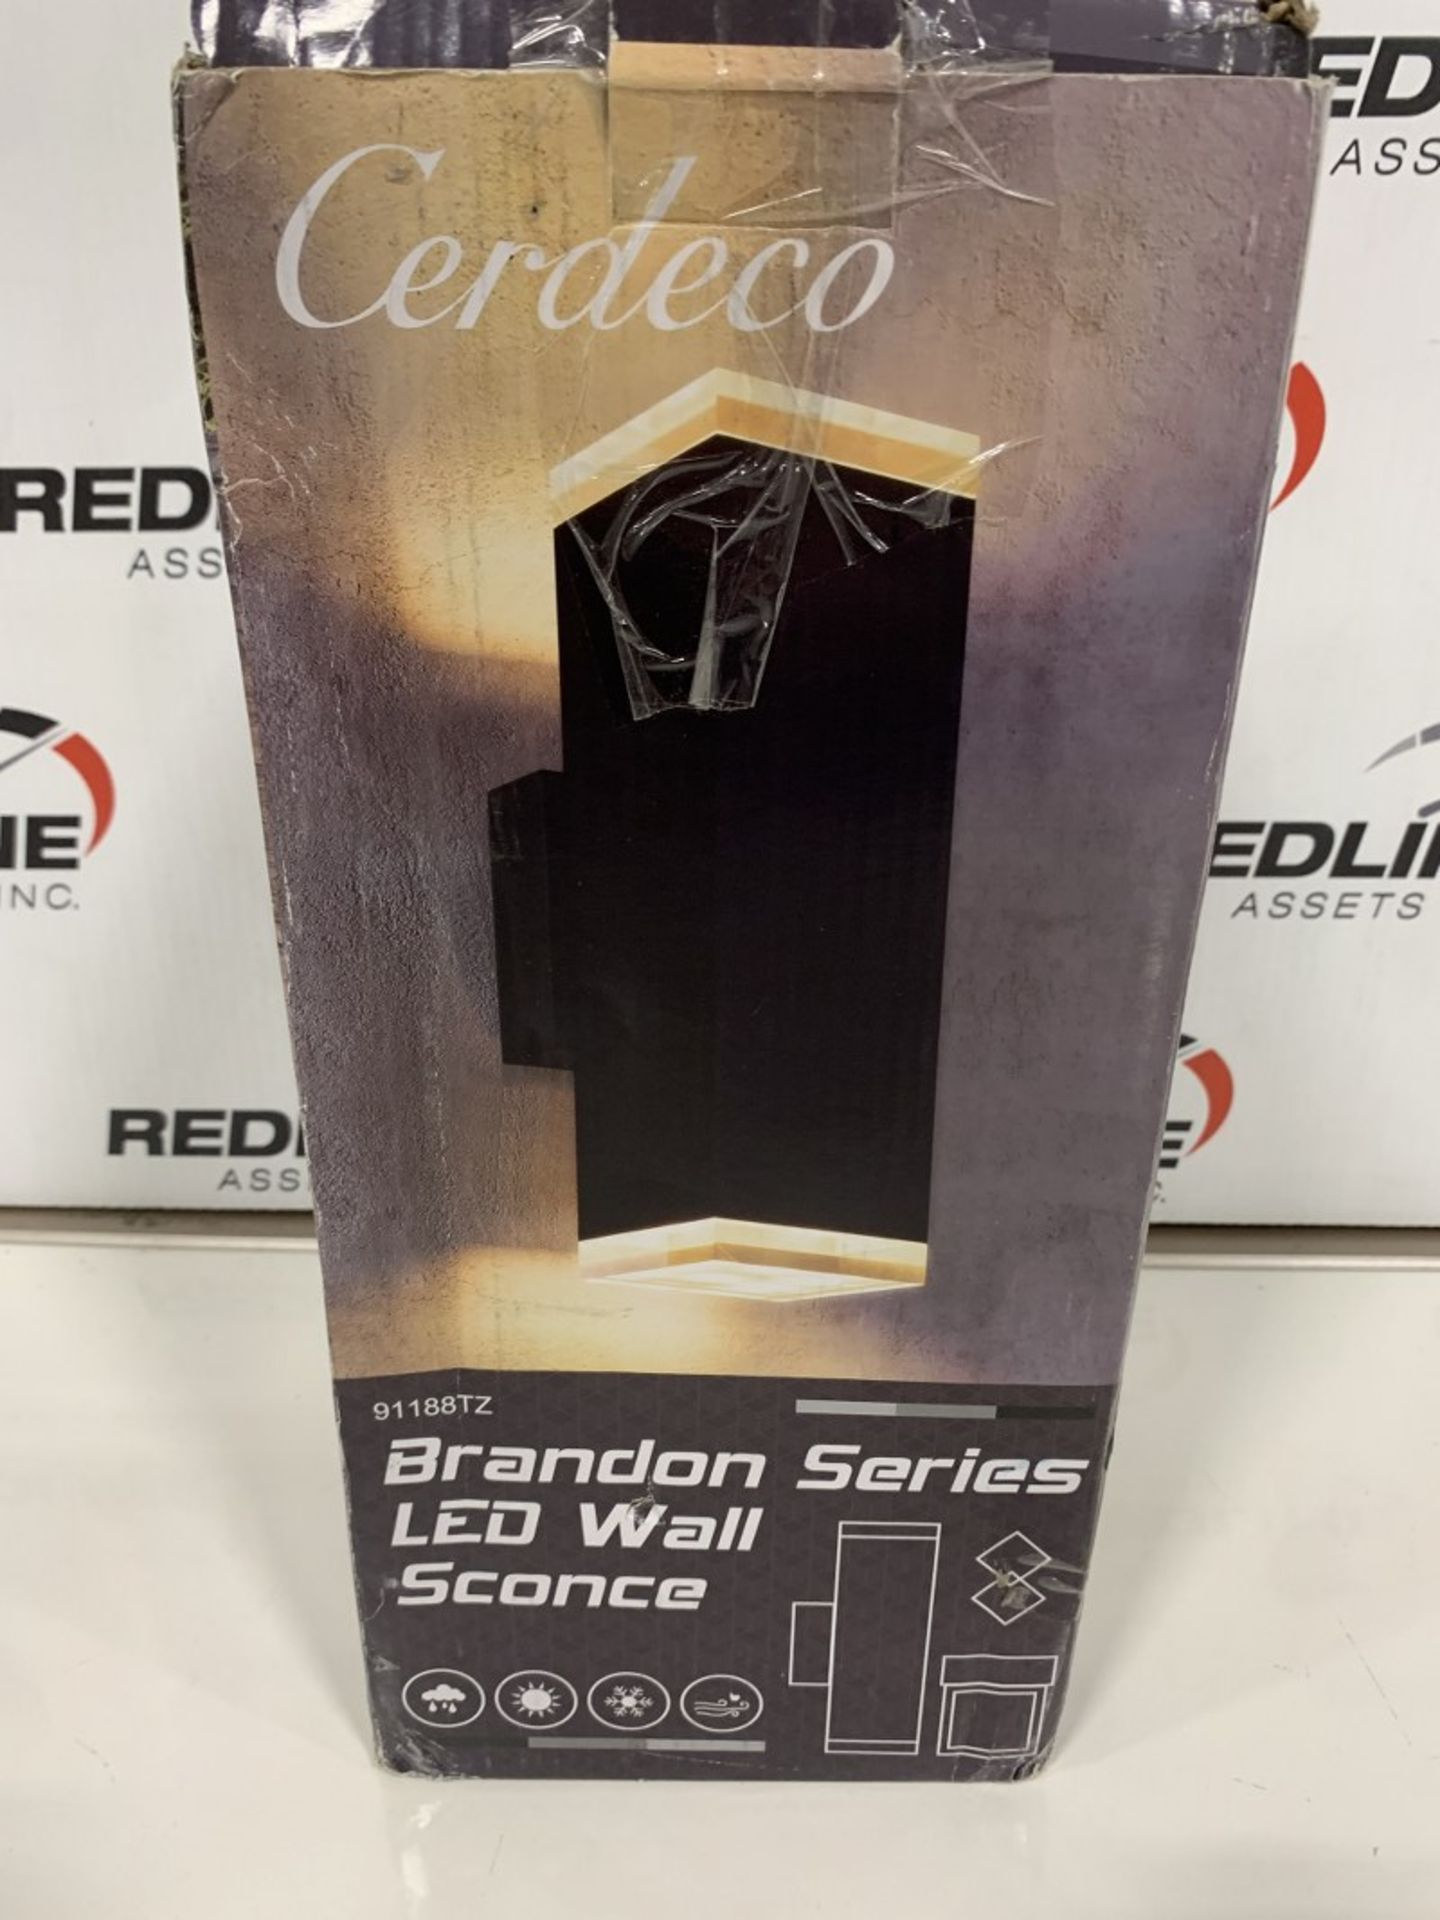 CERDECO - BRANDON SERIES LED WALL SCONCE - Image 2 of 2